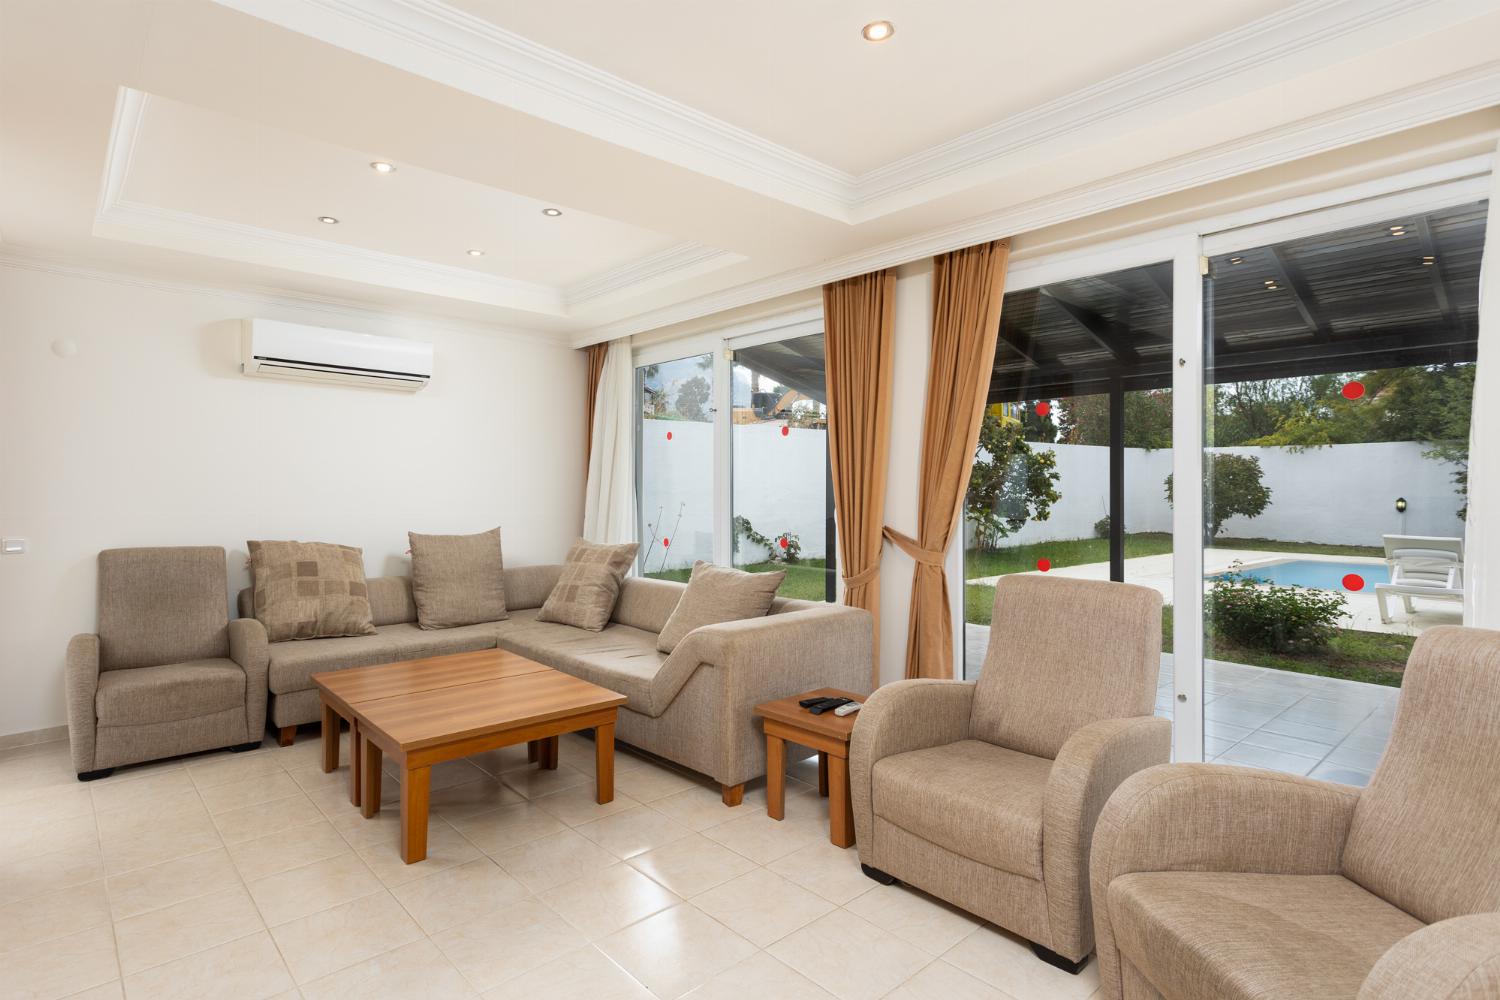 Open-plan living room with sofas, dining area, kitchen, A/C, WiFi internet, and satellite TV